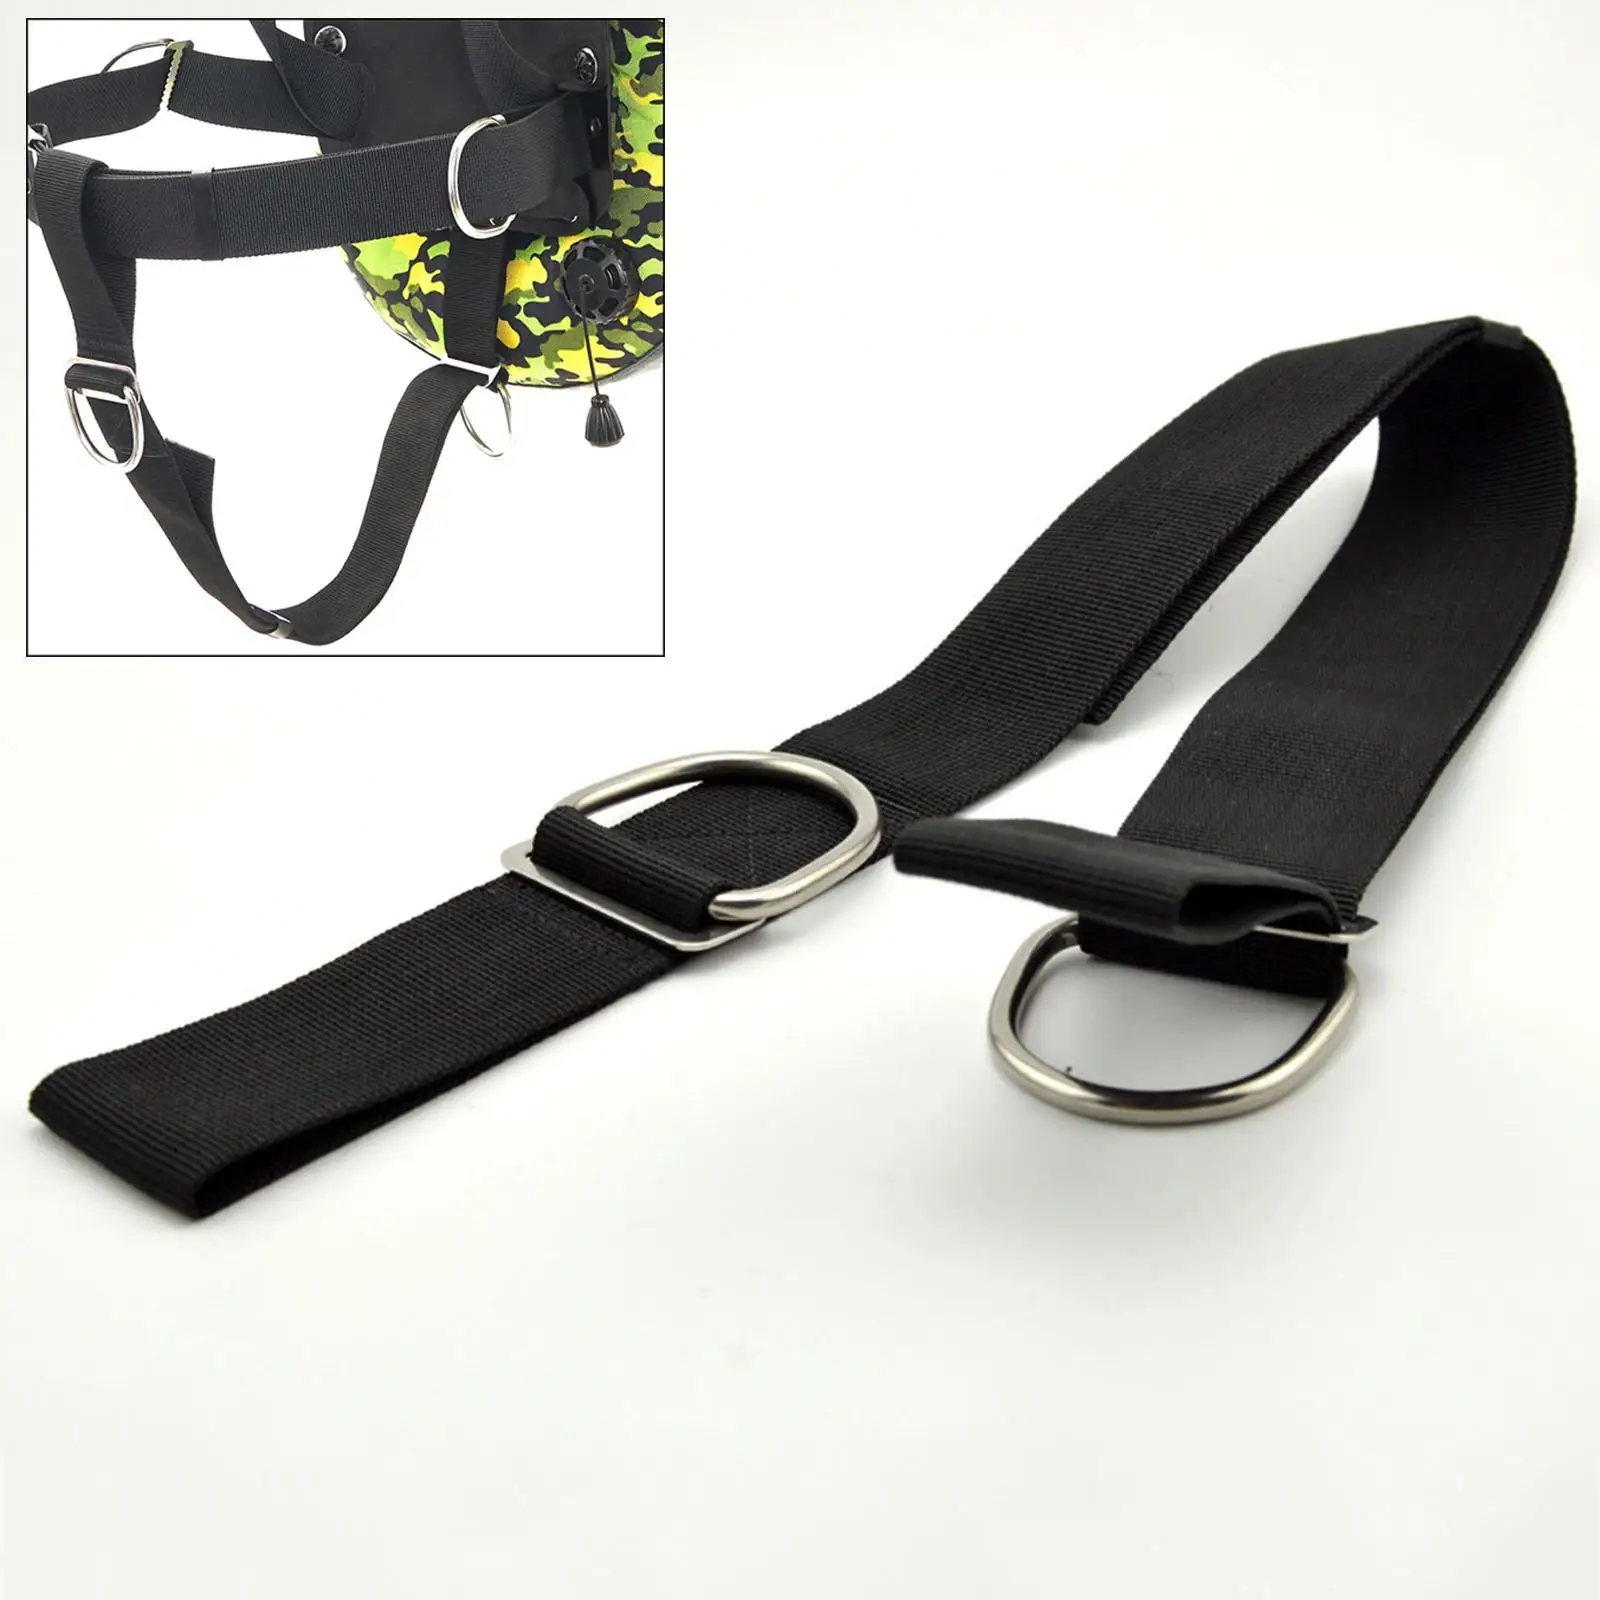  gear  Crotch Strap 50mm/2inch Wide Diving Accessories Part with Loop